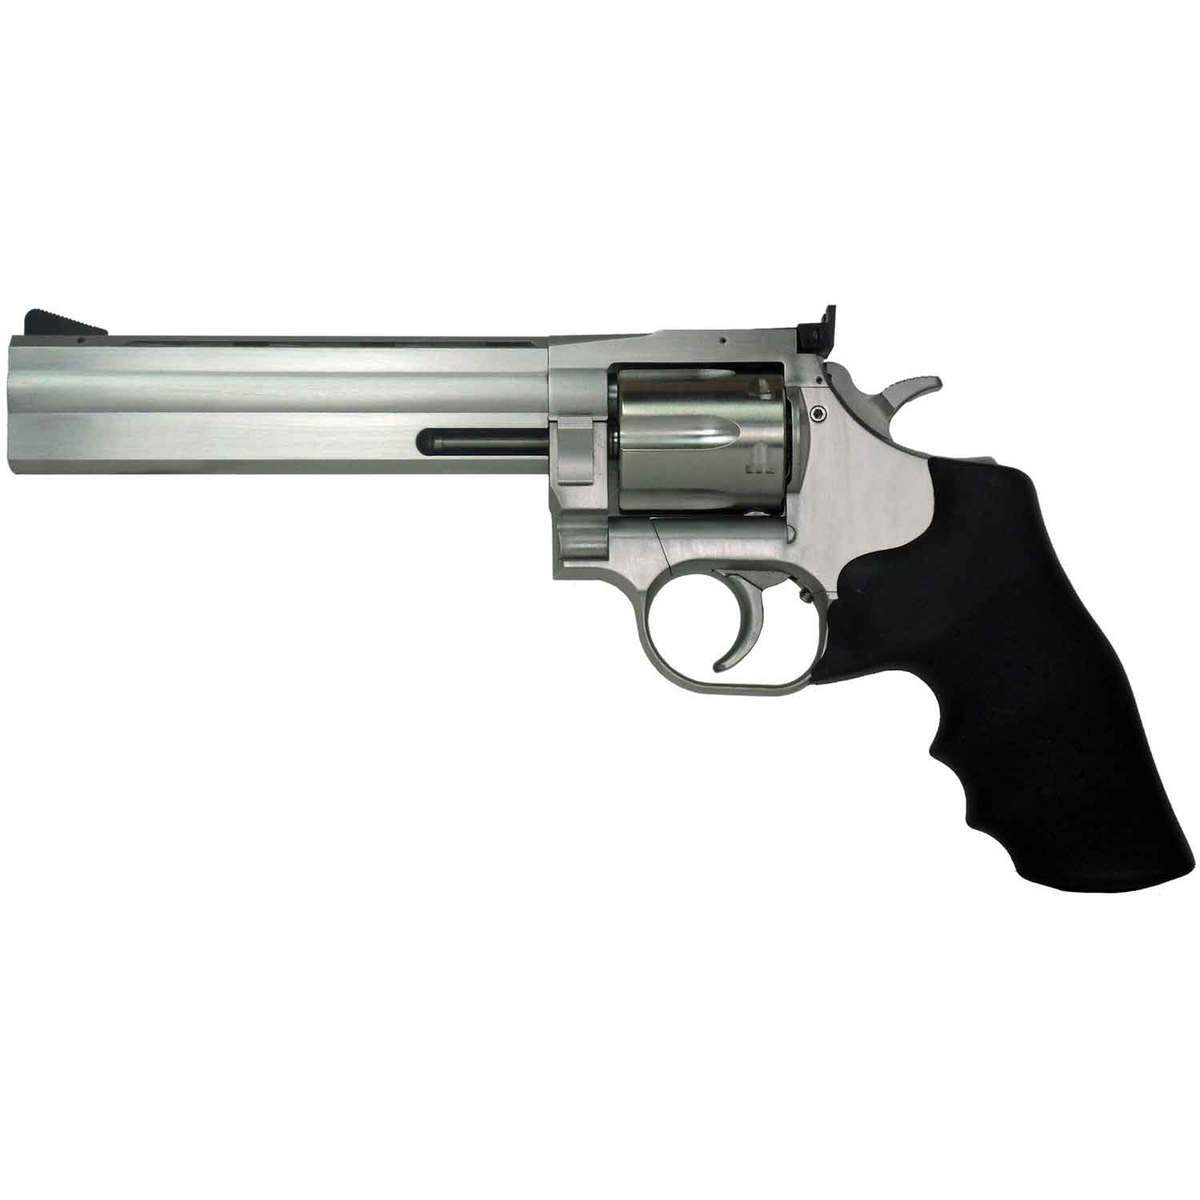 Dan Wesson 715 357 Magnum 6in Stainless Revolver 6 Rounds Sportsmans Warehouse 7567